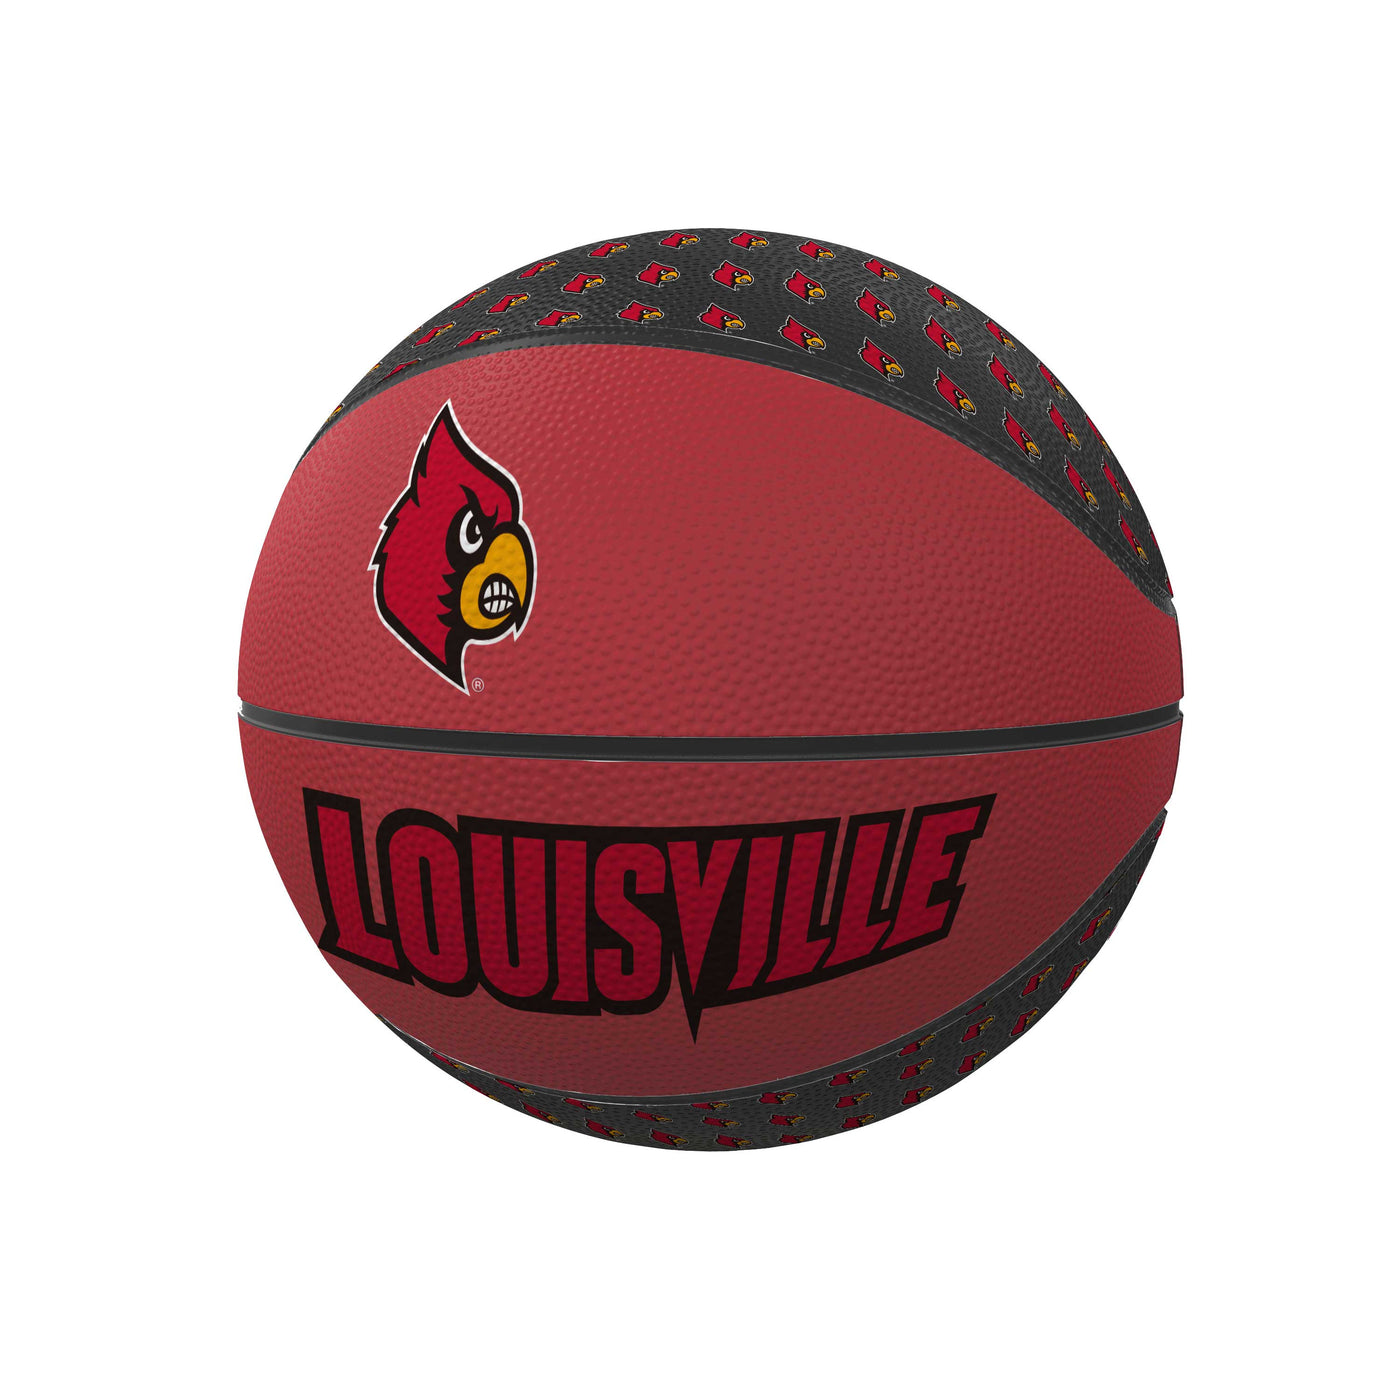 Louisville Repeating Logo Mini-Size Rubber Basketball